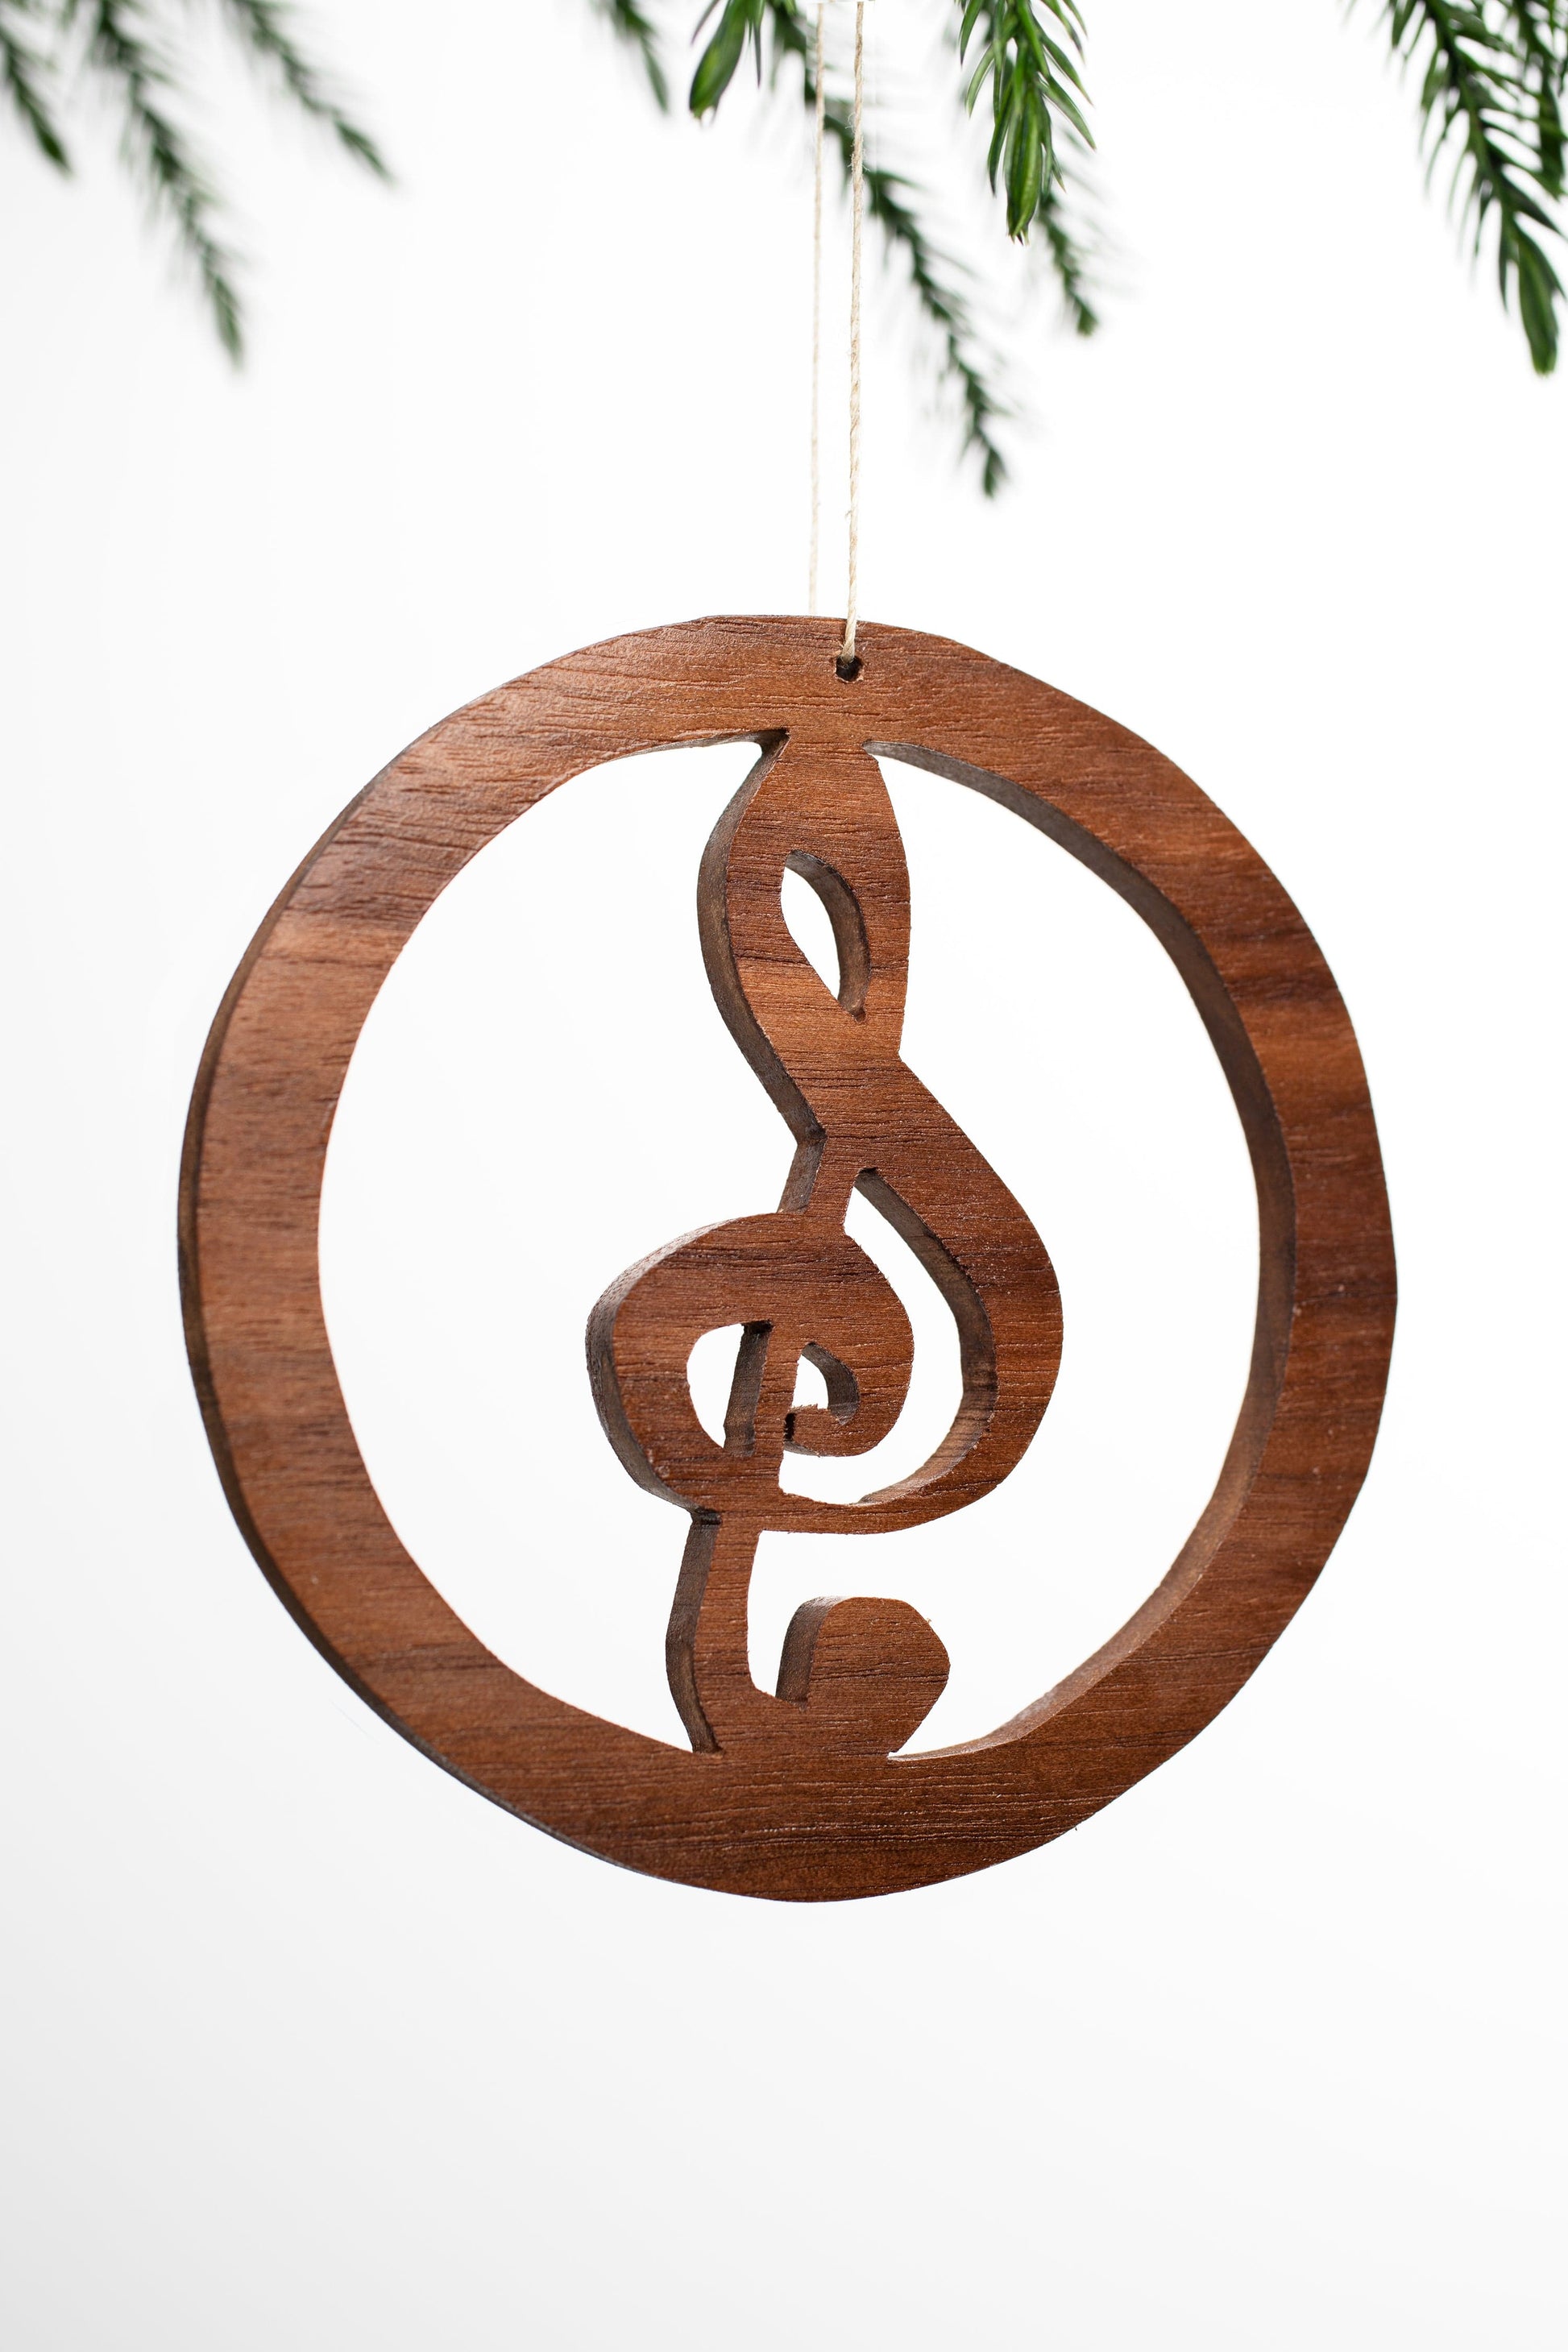 The Carpentry Shop Co. Solid Wood Holiday Ornaments